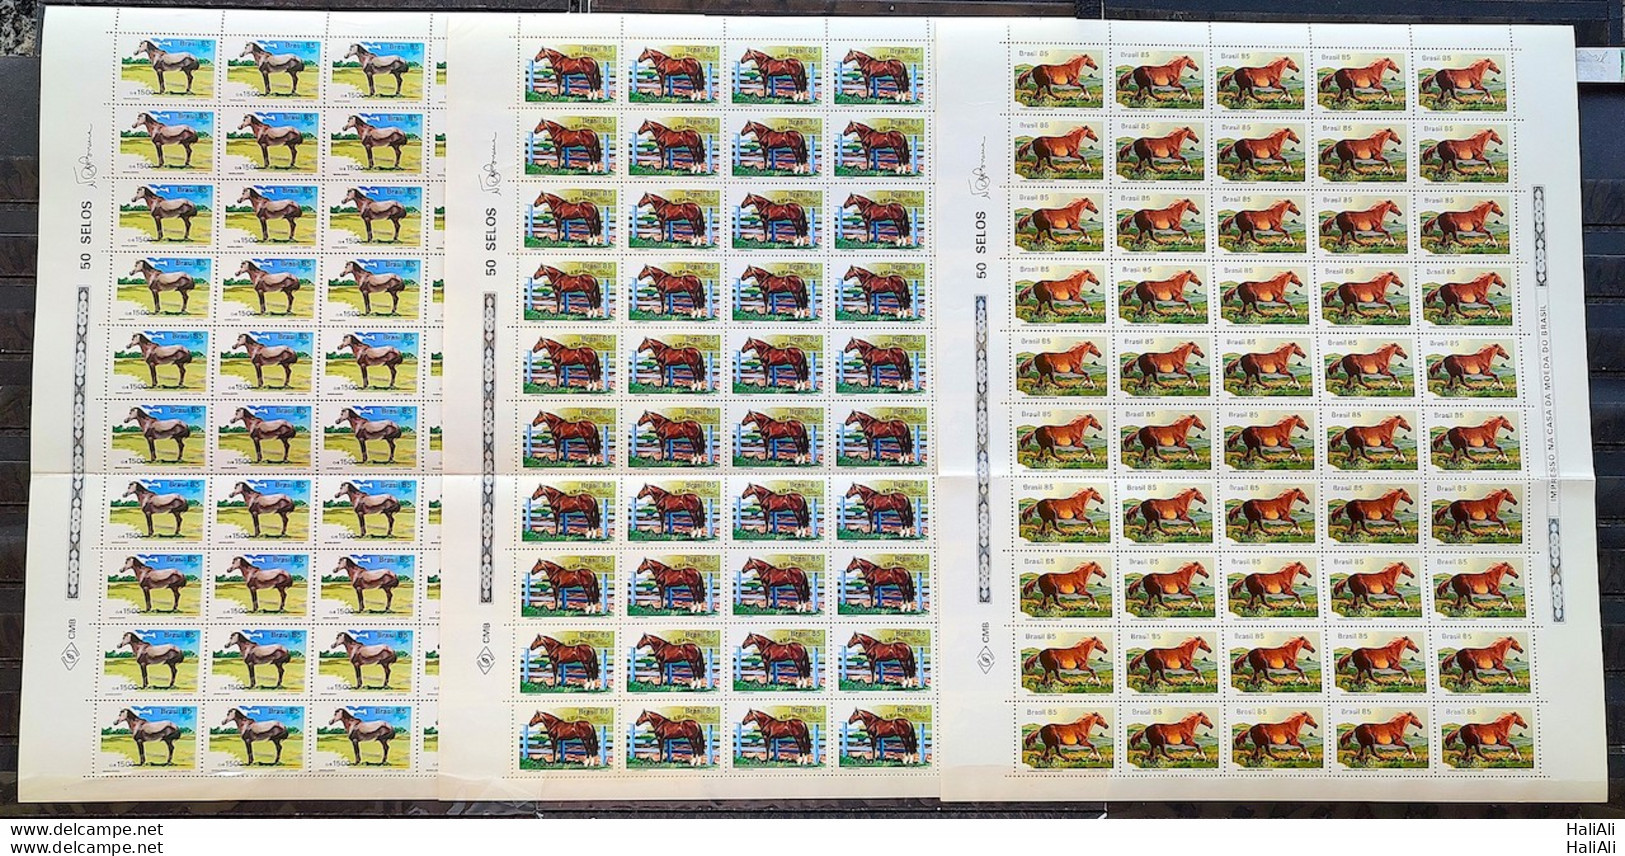 C 1444 Brazil Stamp Brazilian Breed Horses 1985 Sheet Complete Series - Unused Stamps